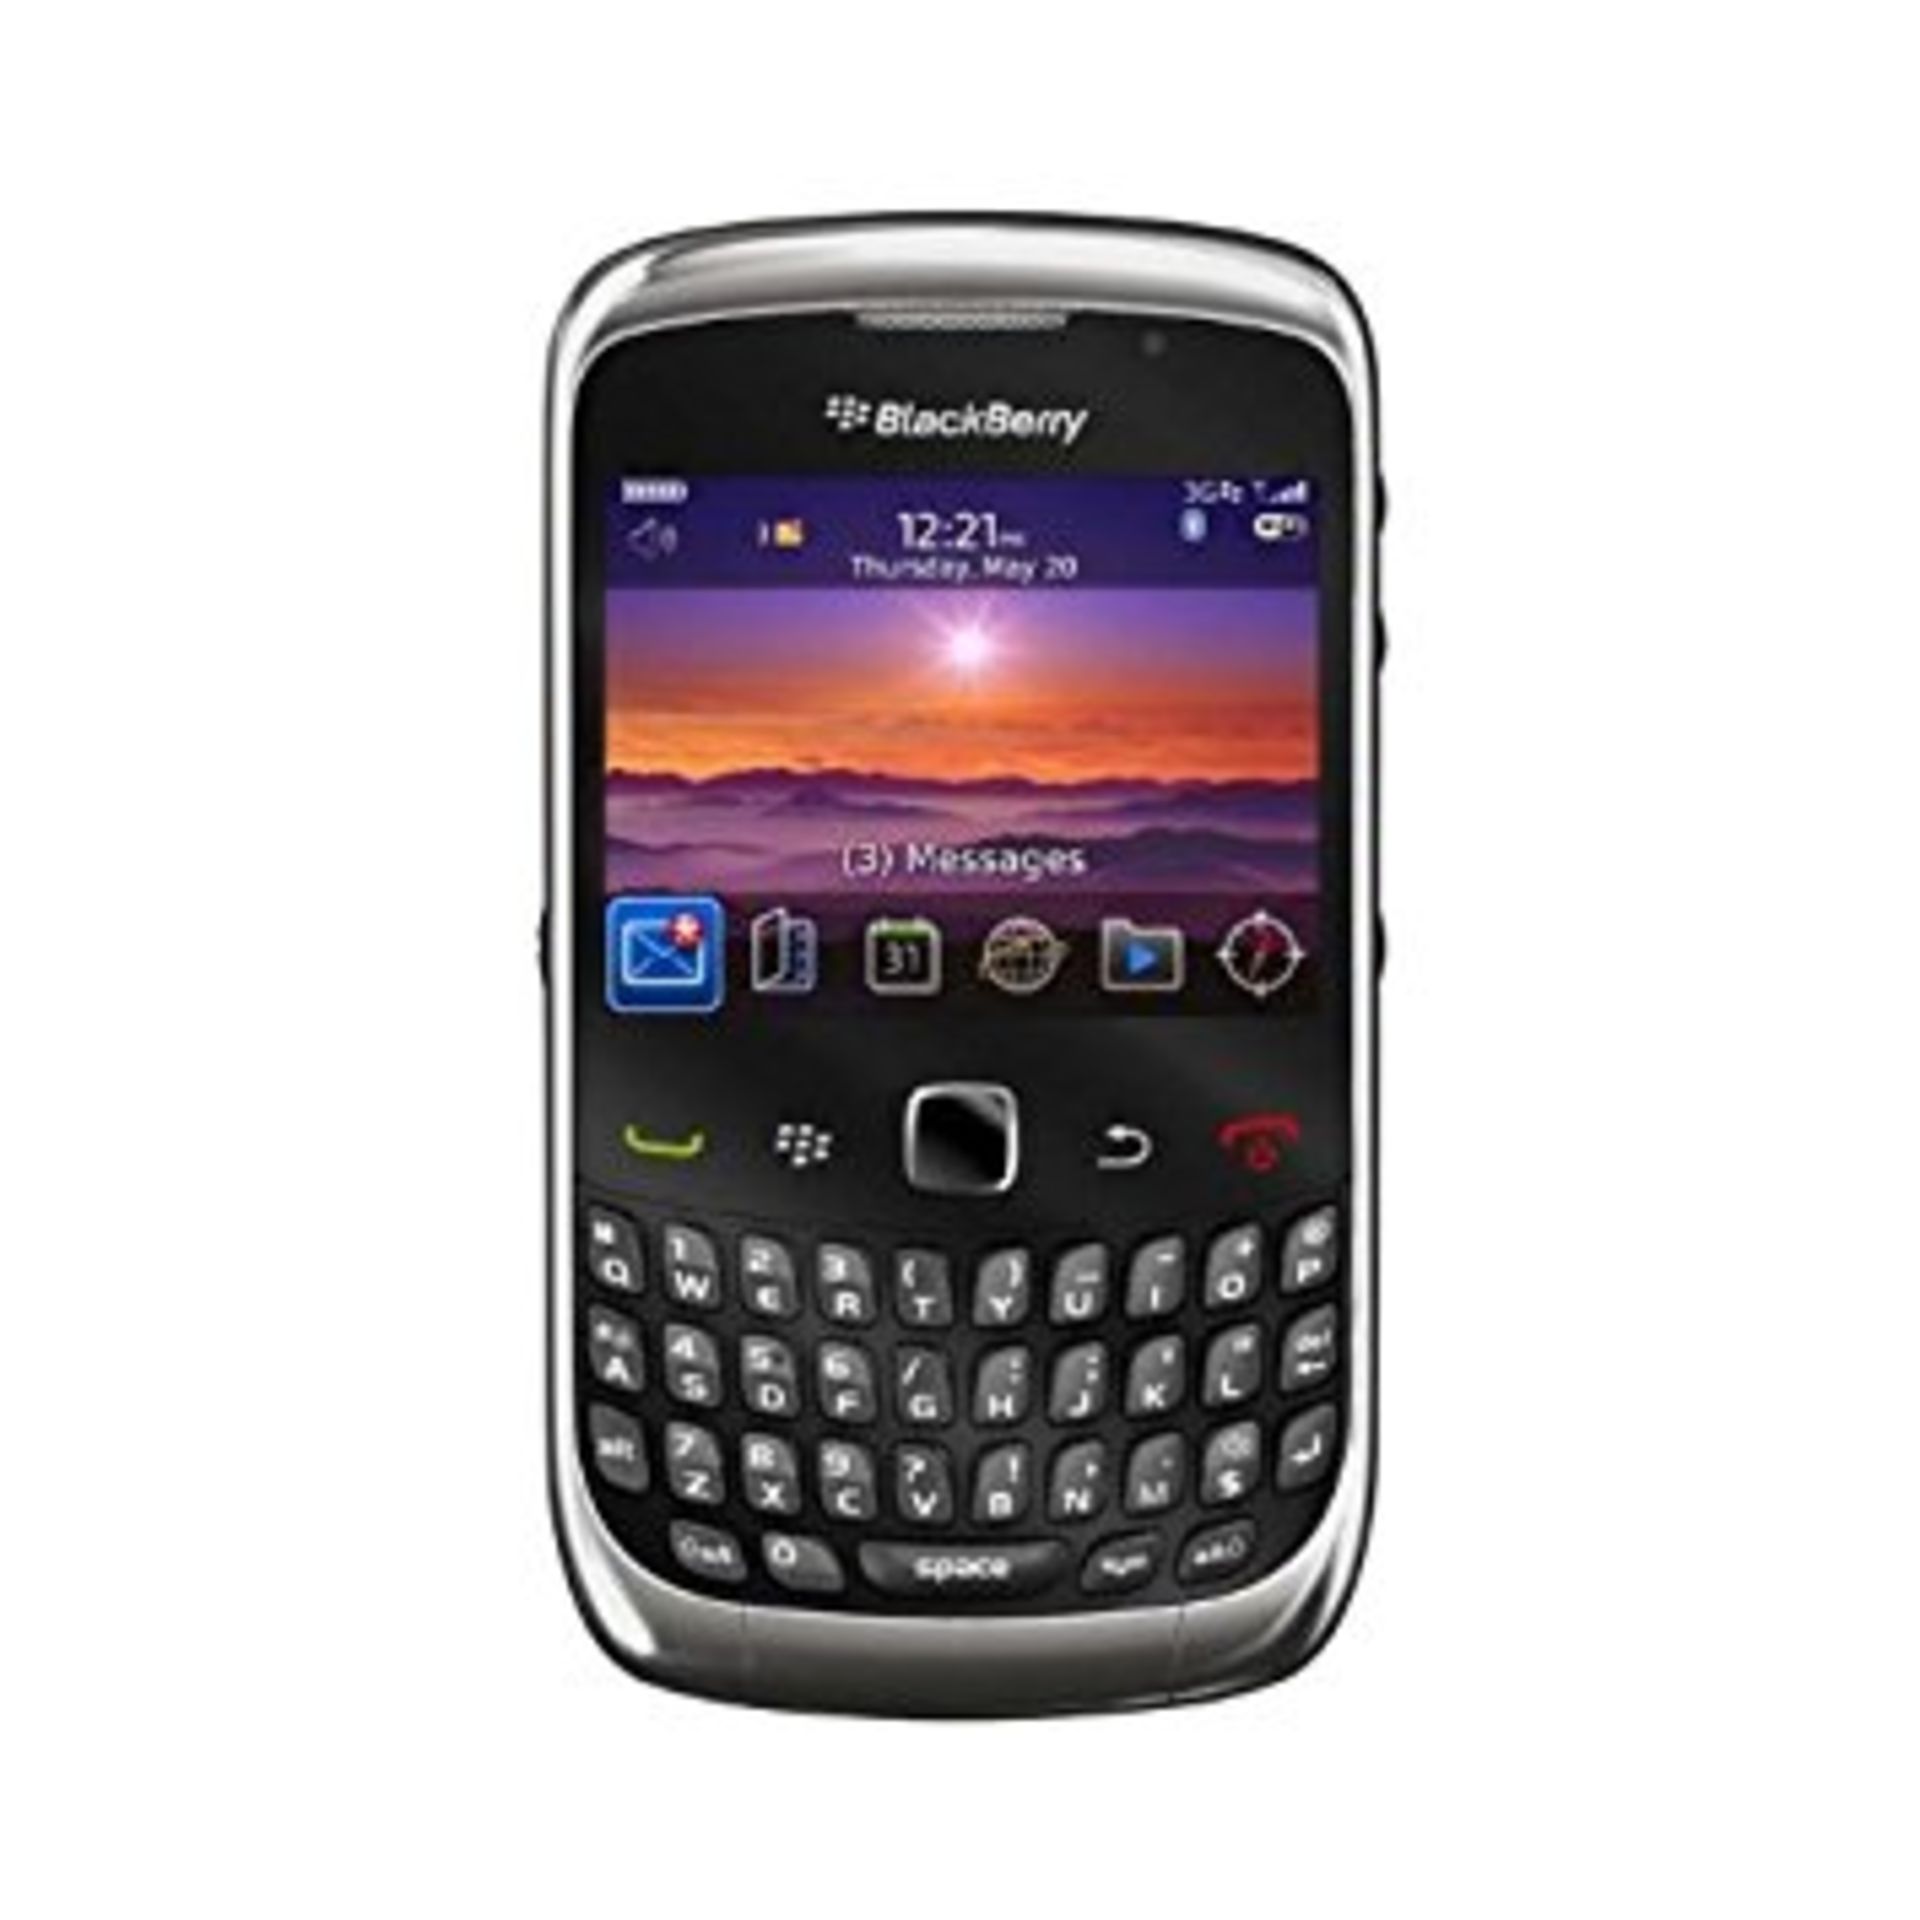 Grade A Blackberry 9300 Colours May Vary Item available approx 12 working days after sale